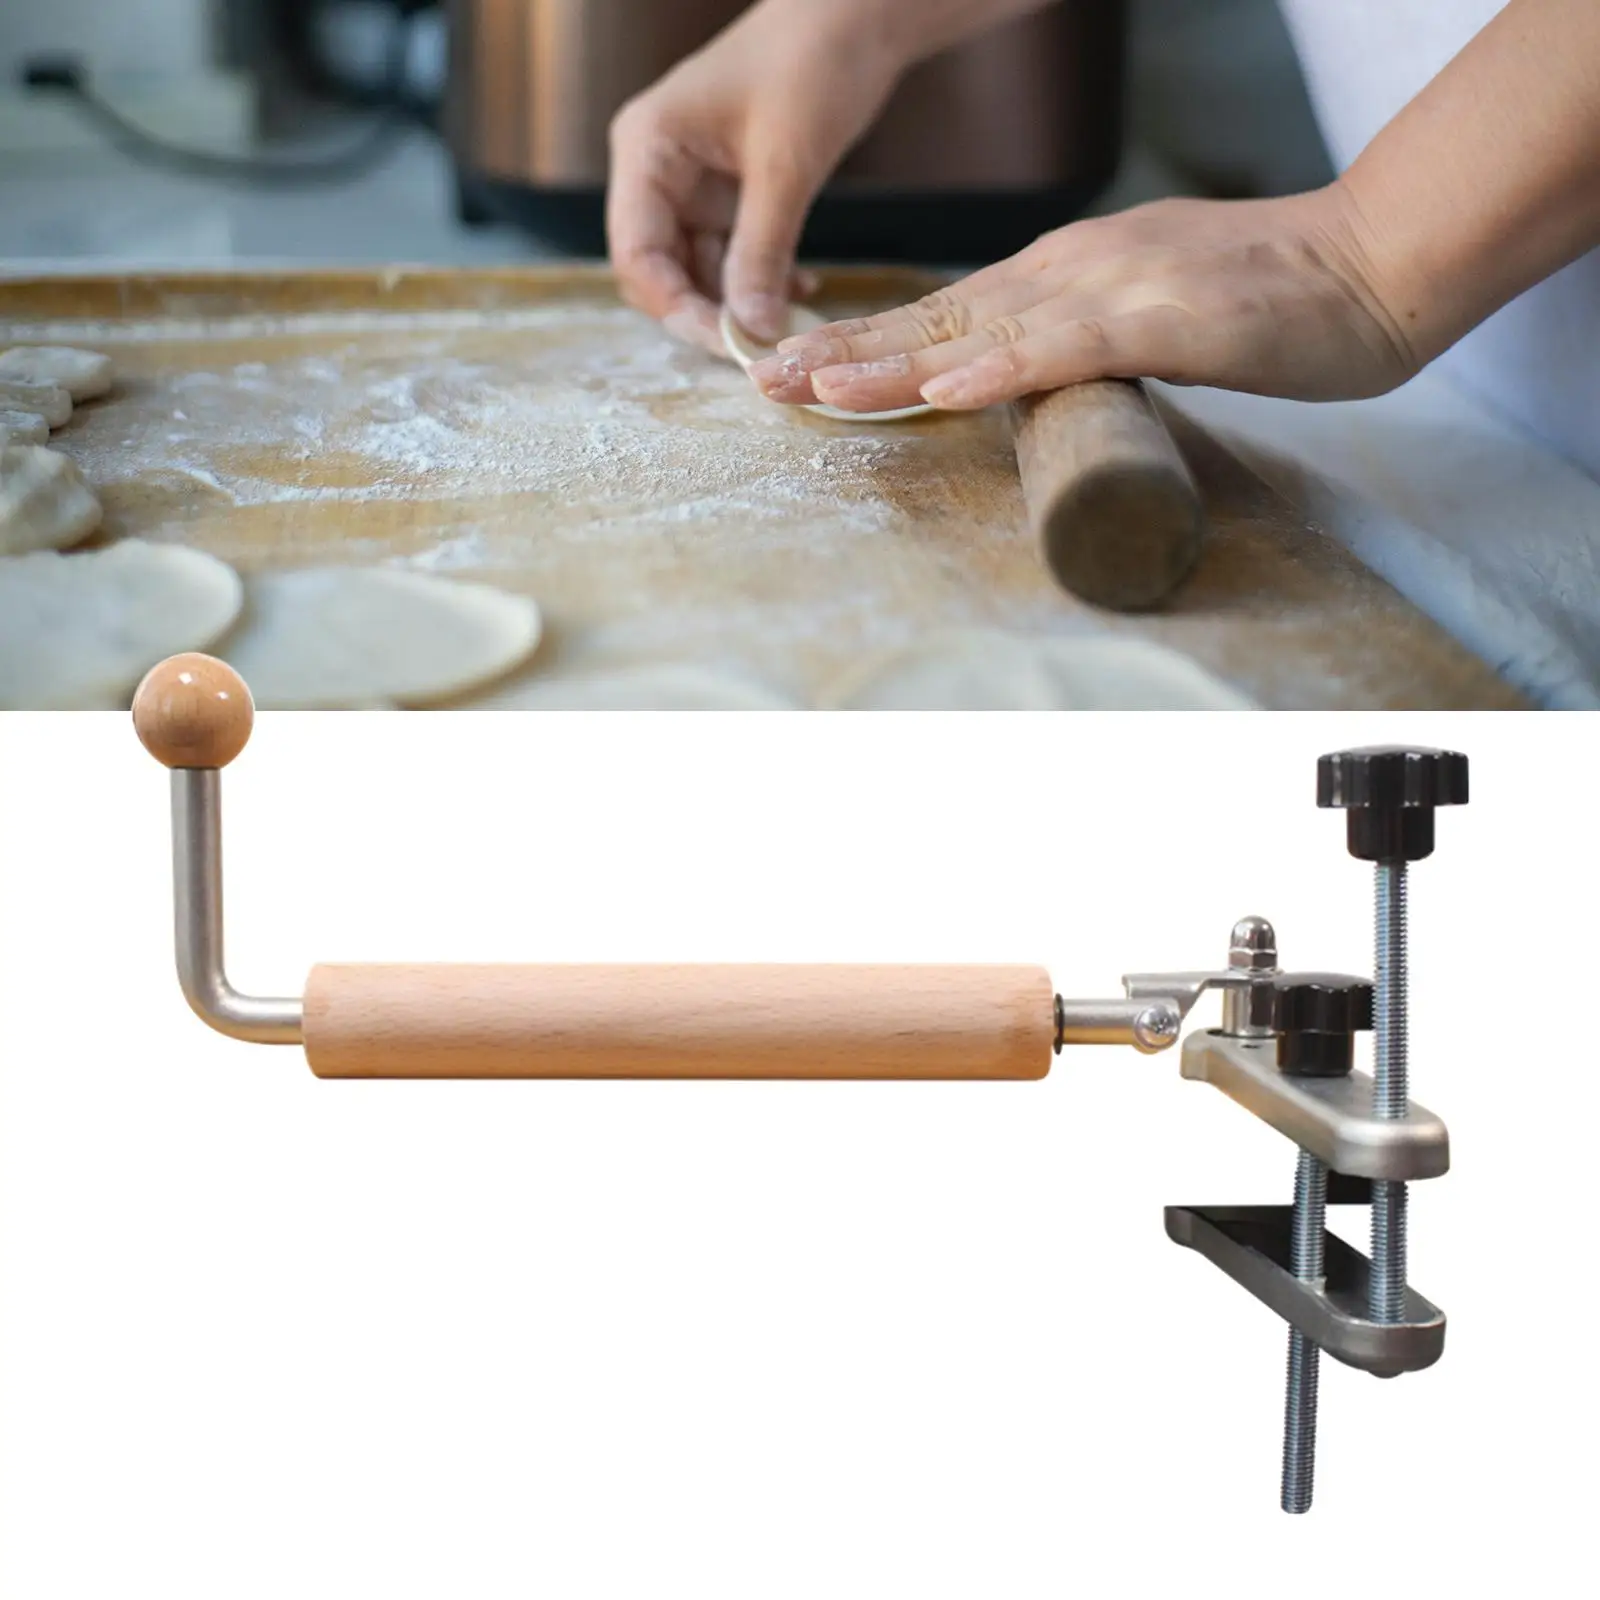 Wooden Rolling Pin Kitchen Accessories for Baking Durable with Handles Baking Rolling Pin for Baking Bread Pastry Fondant Cookie